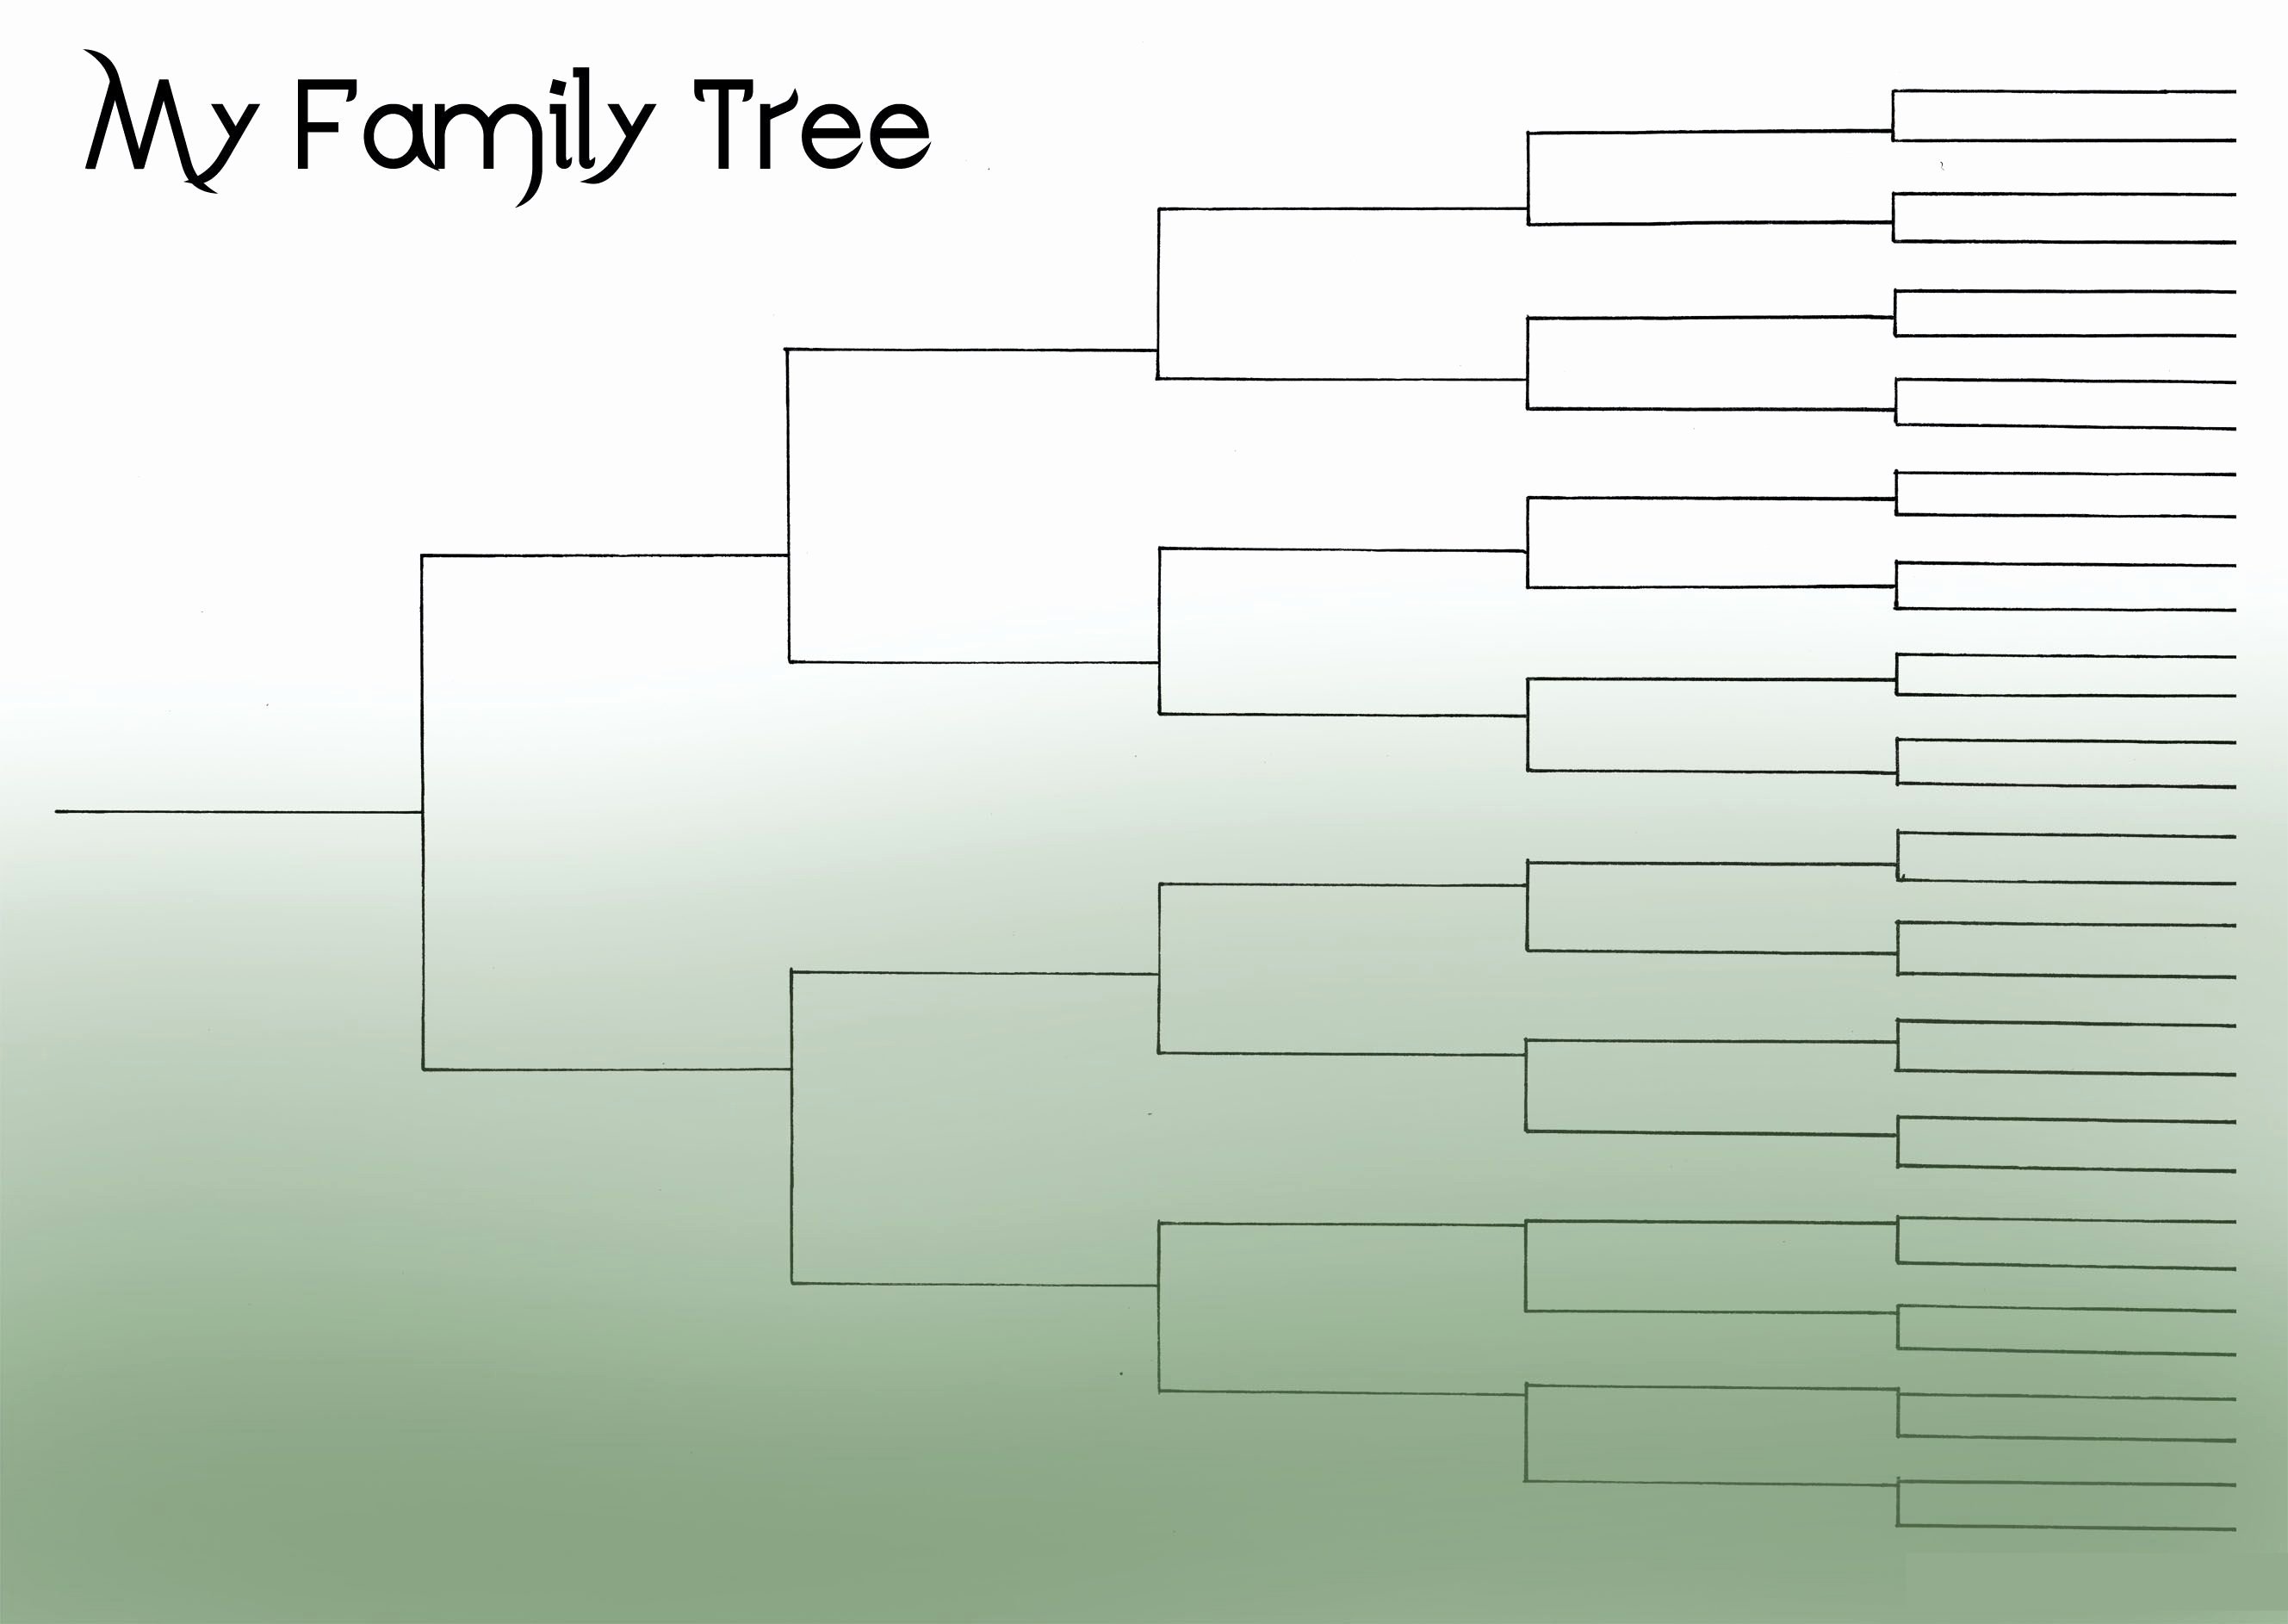 Fillable Family Tree Template New Free Editable Family Tree Template Daily Roabox